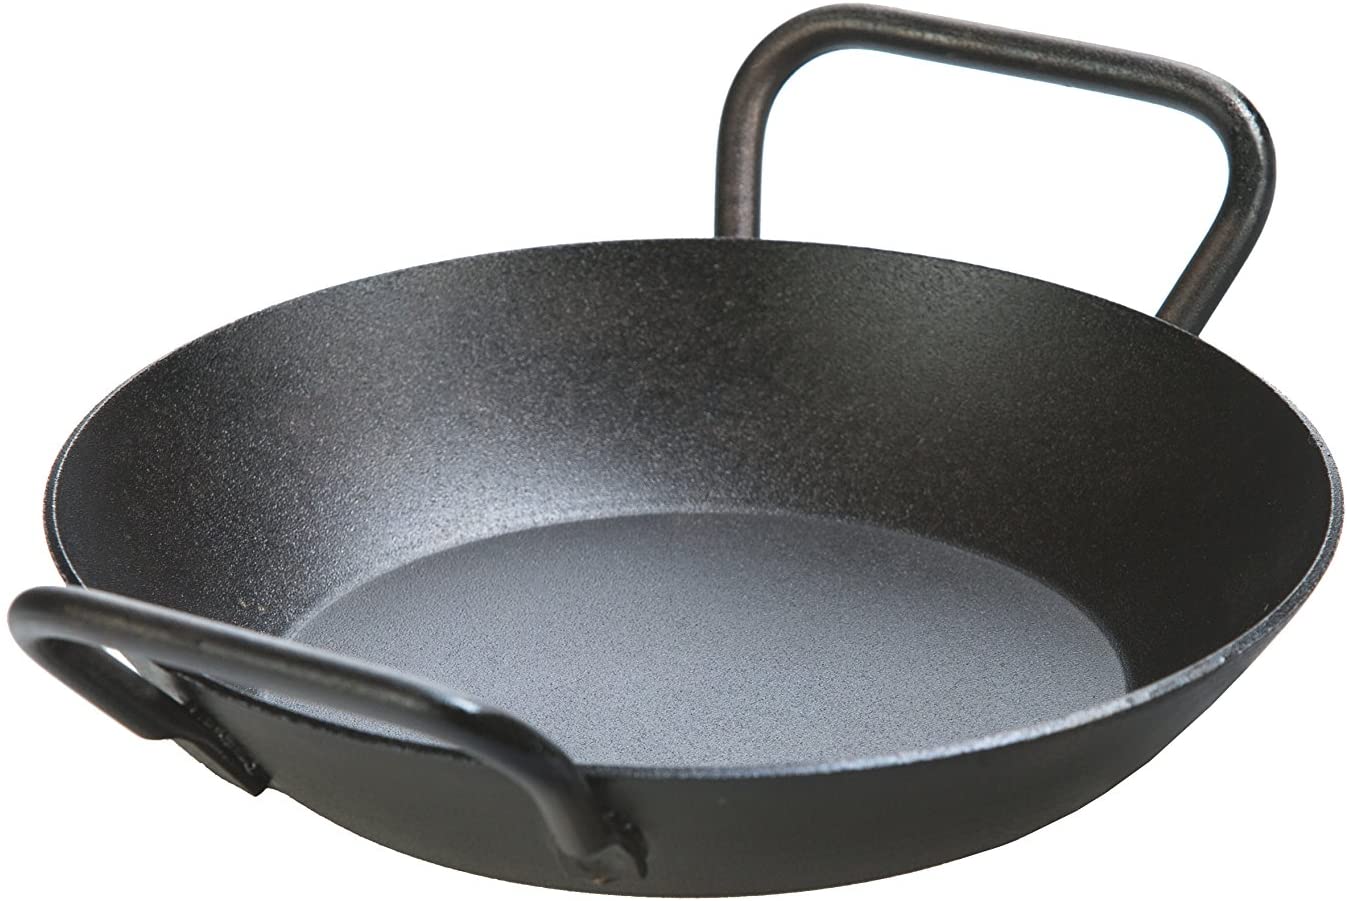 Lodge 17SK Large Cast Iron Skillet, 17-inch double handle